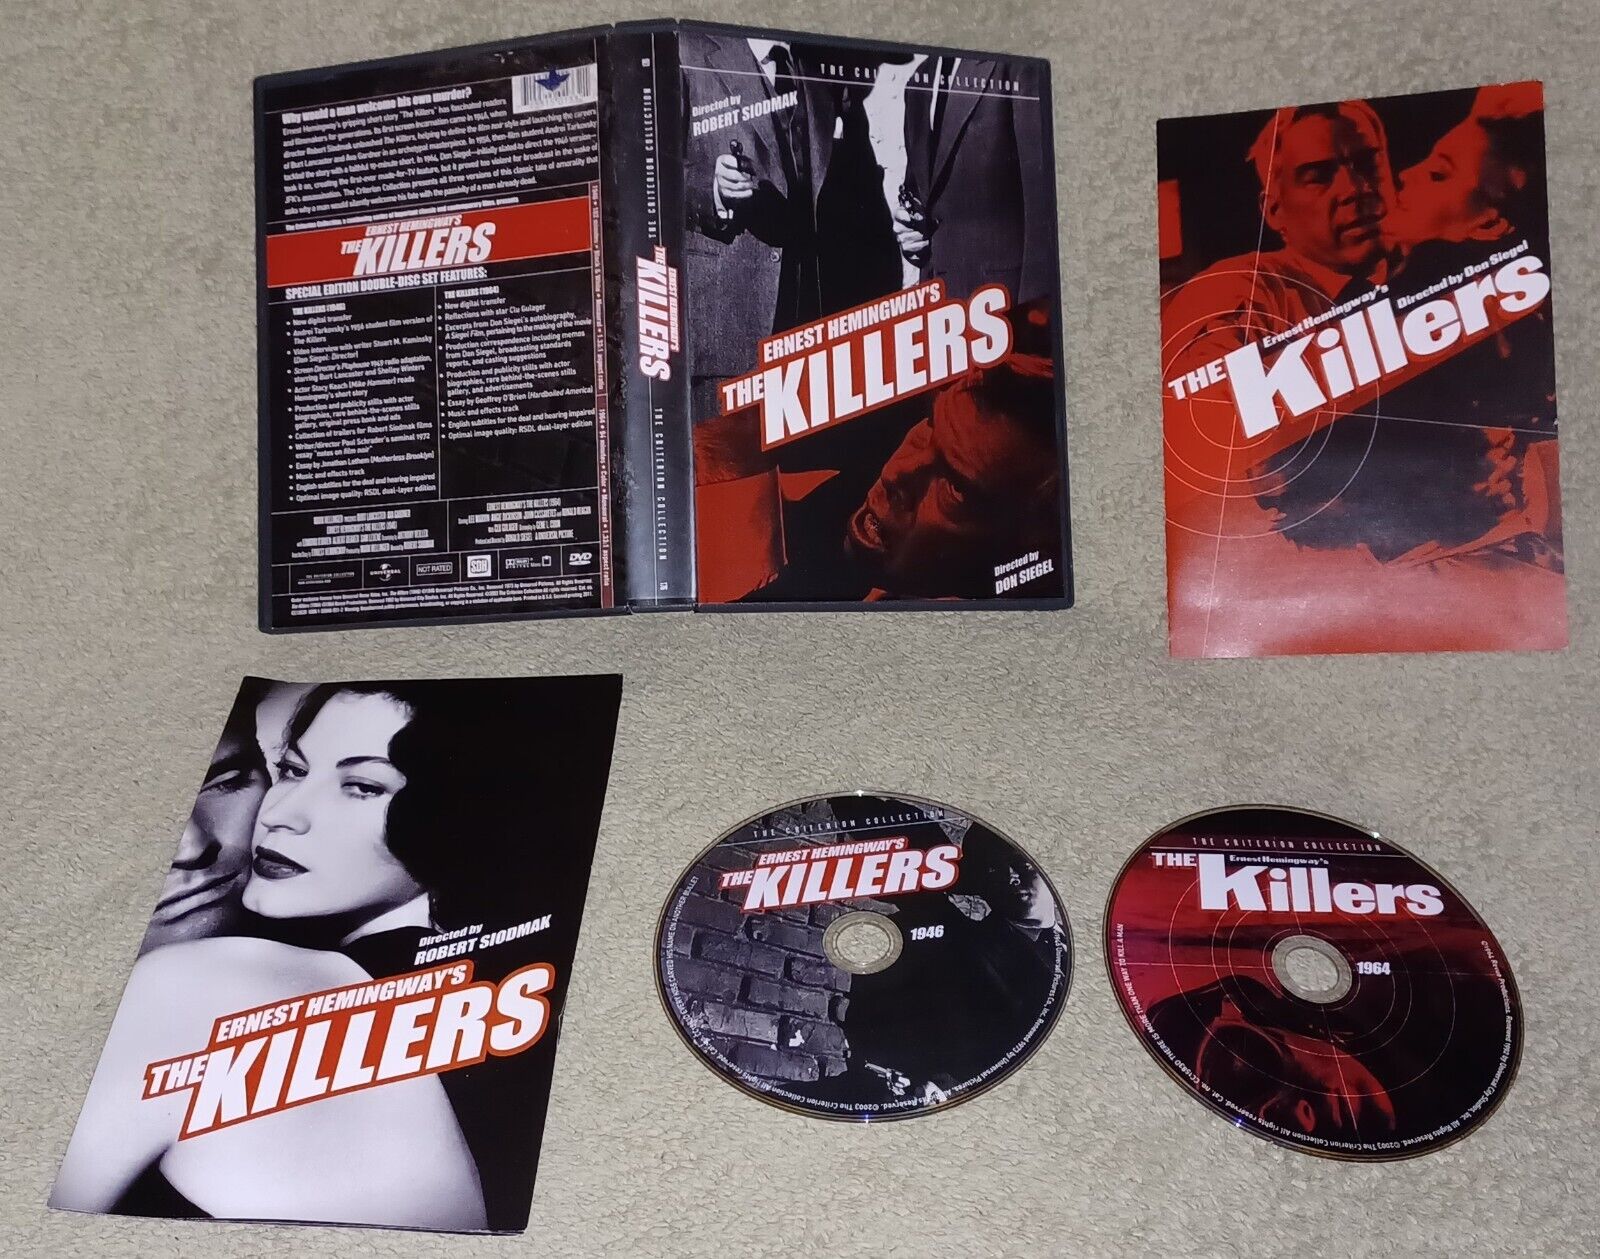 Killers Criterion Collection DVD 1946 & 1964 Versions (DVD)